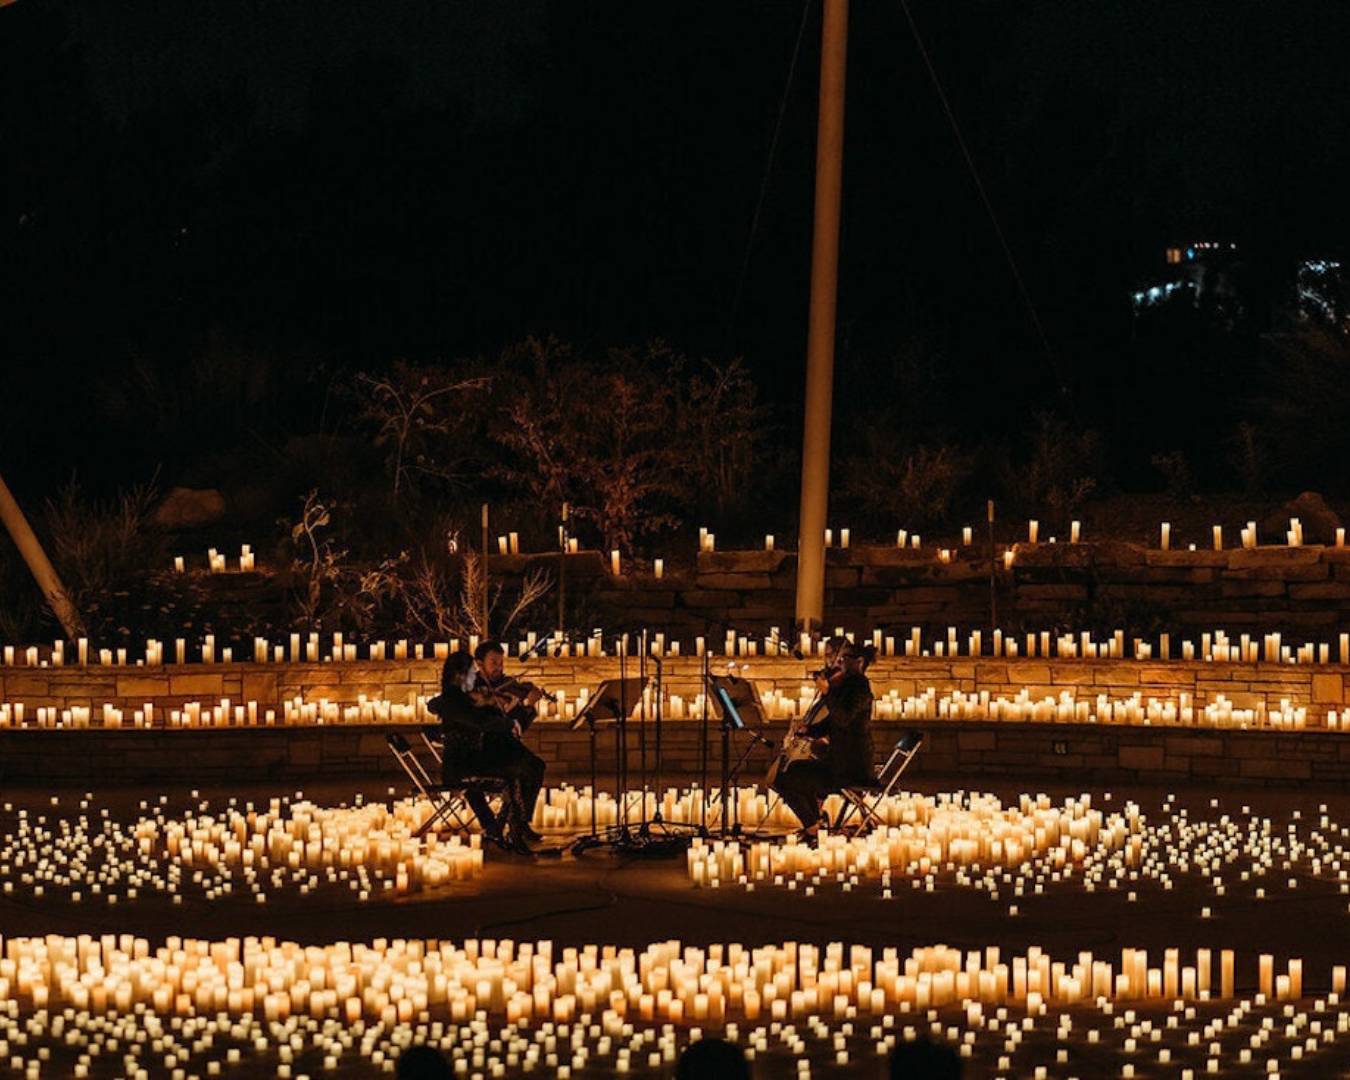 A Candlelight Concert, one of Perth's best date ideas